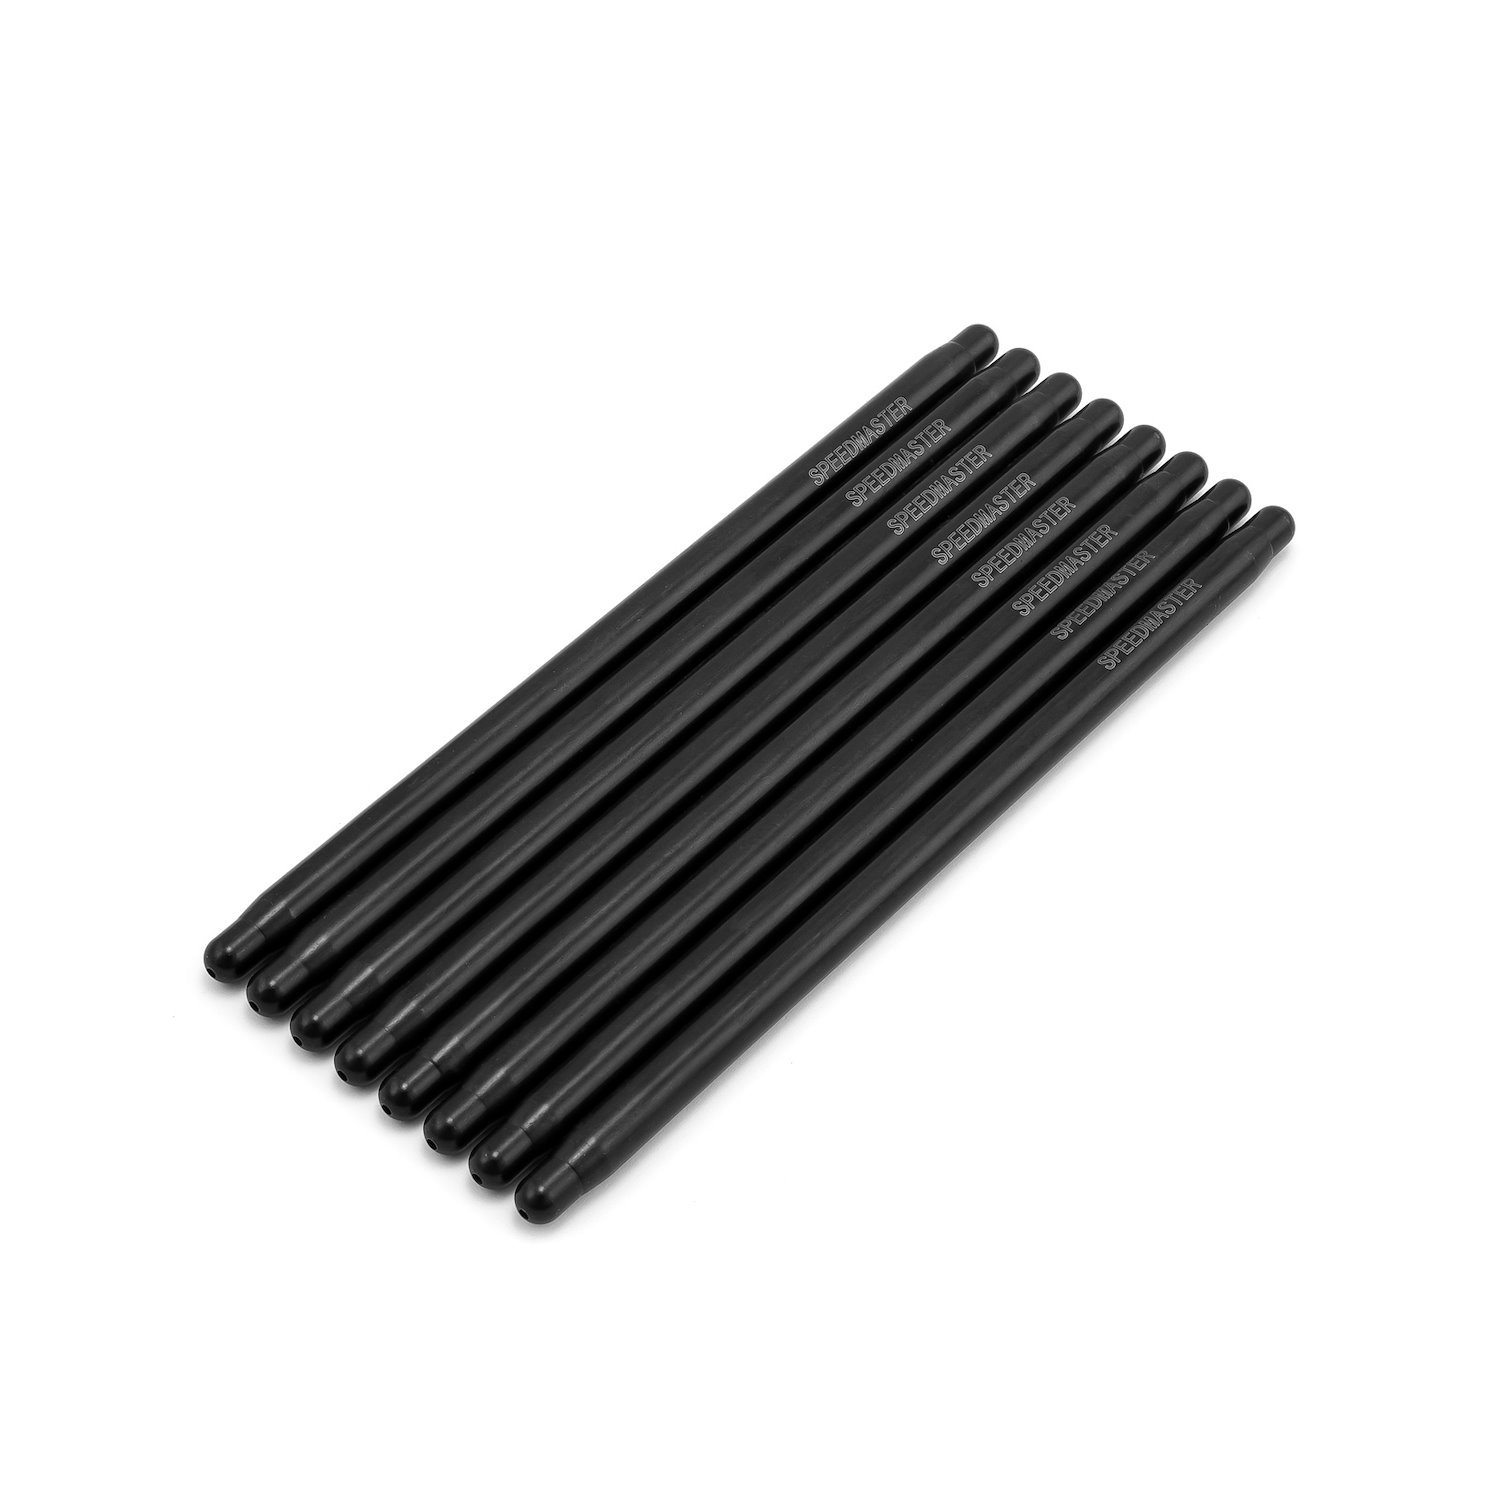 1-254-028 8.280 in. Chromoly Heat-Treated 3/8 in. 0.080 in. Wall DNA One-Piece Pushrods